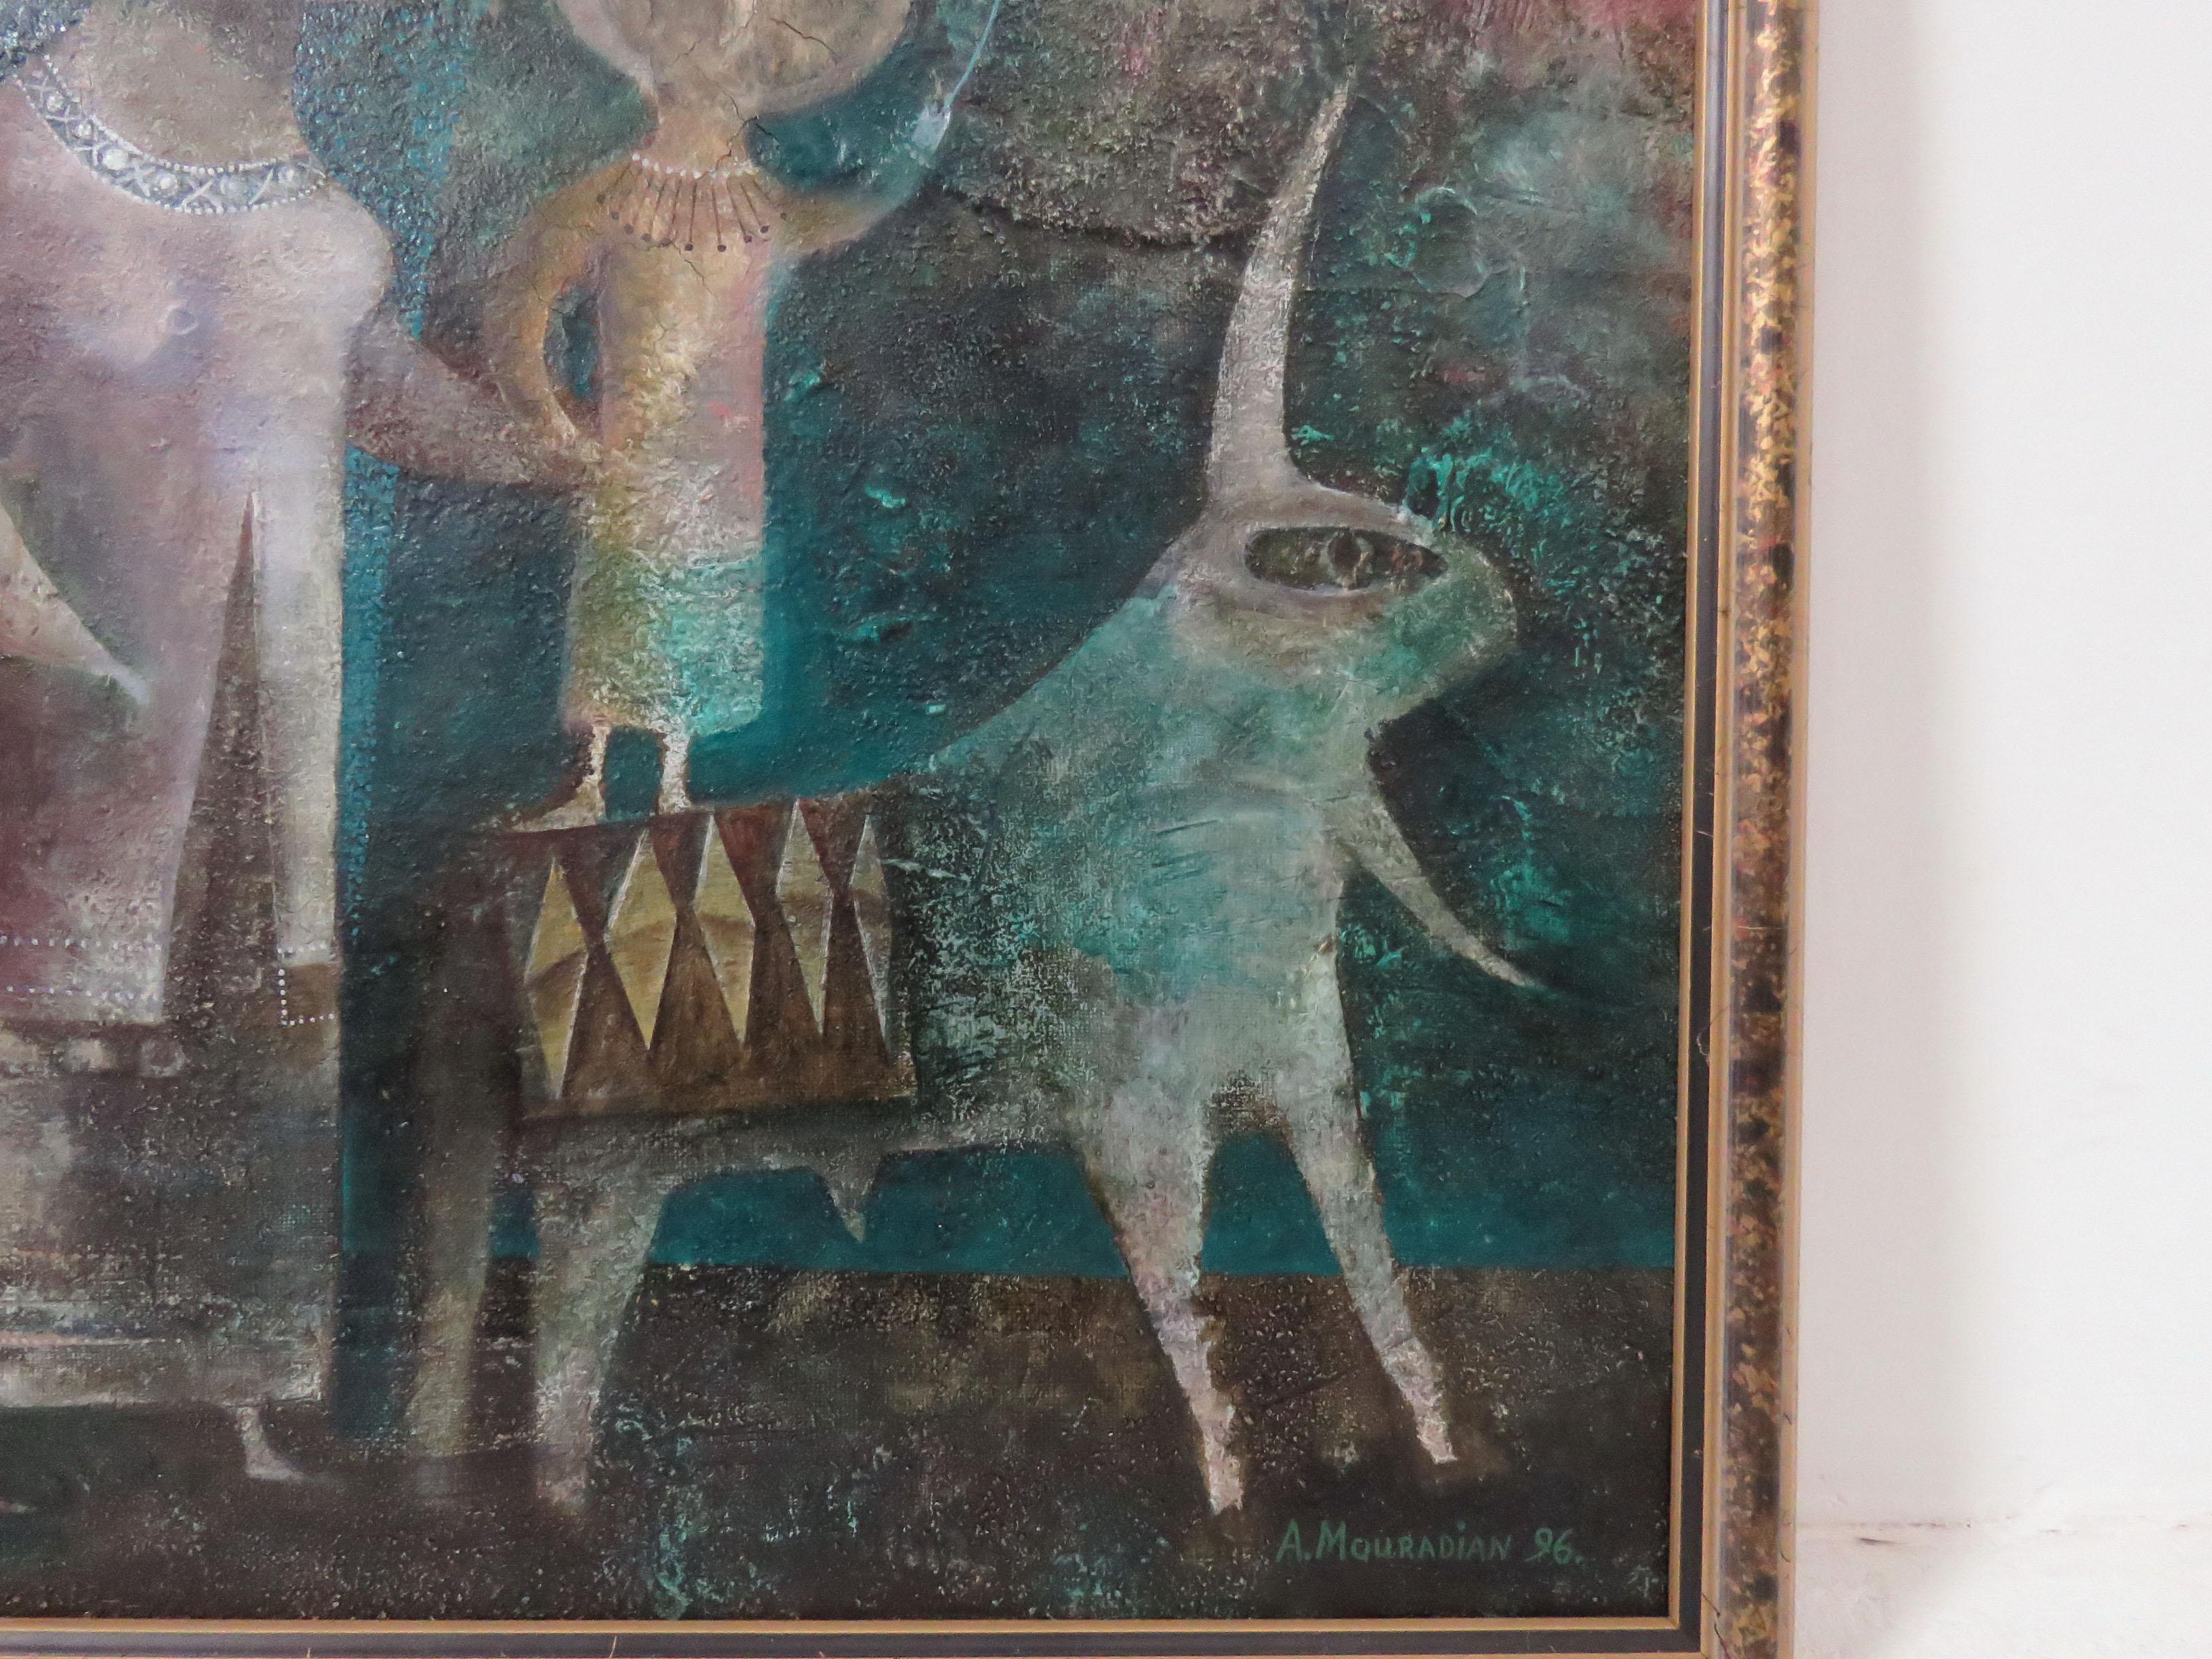 A Modernist Inspired Fable Painting by Armenian Artist A. Mouradian 1